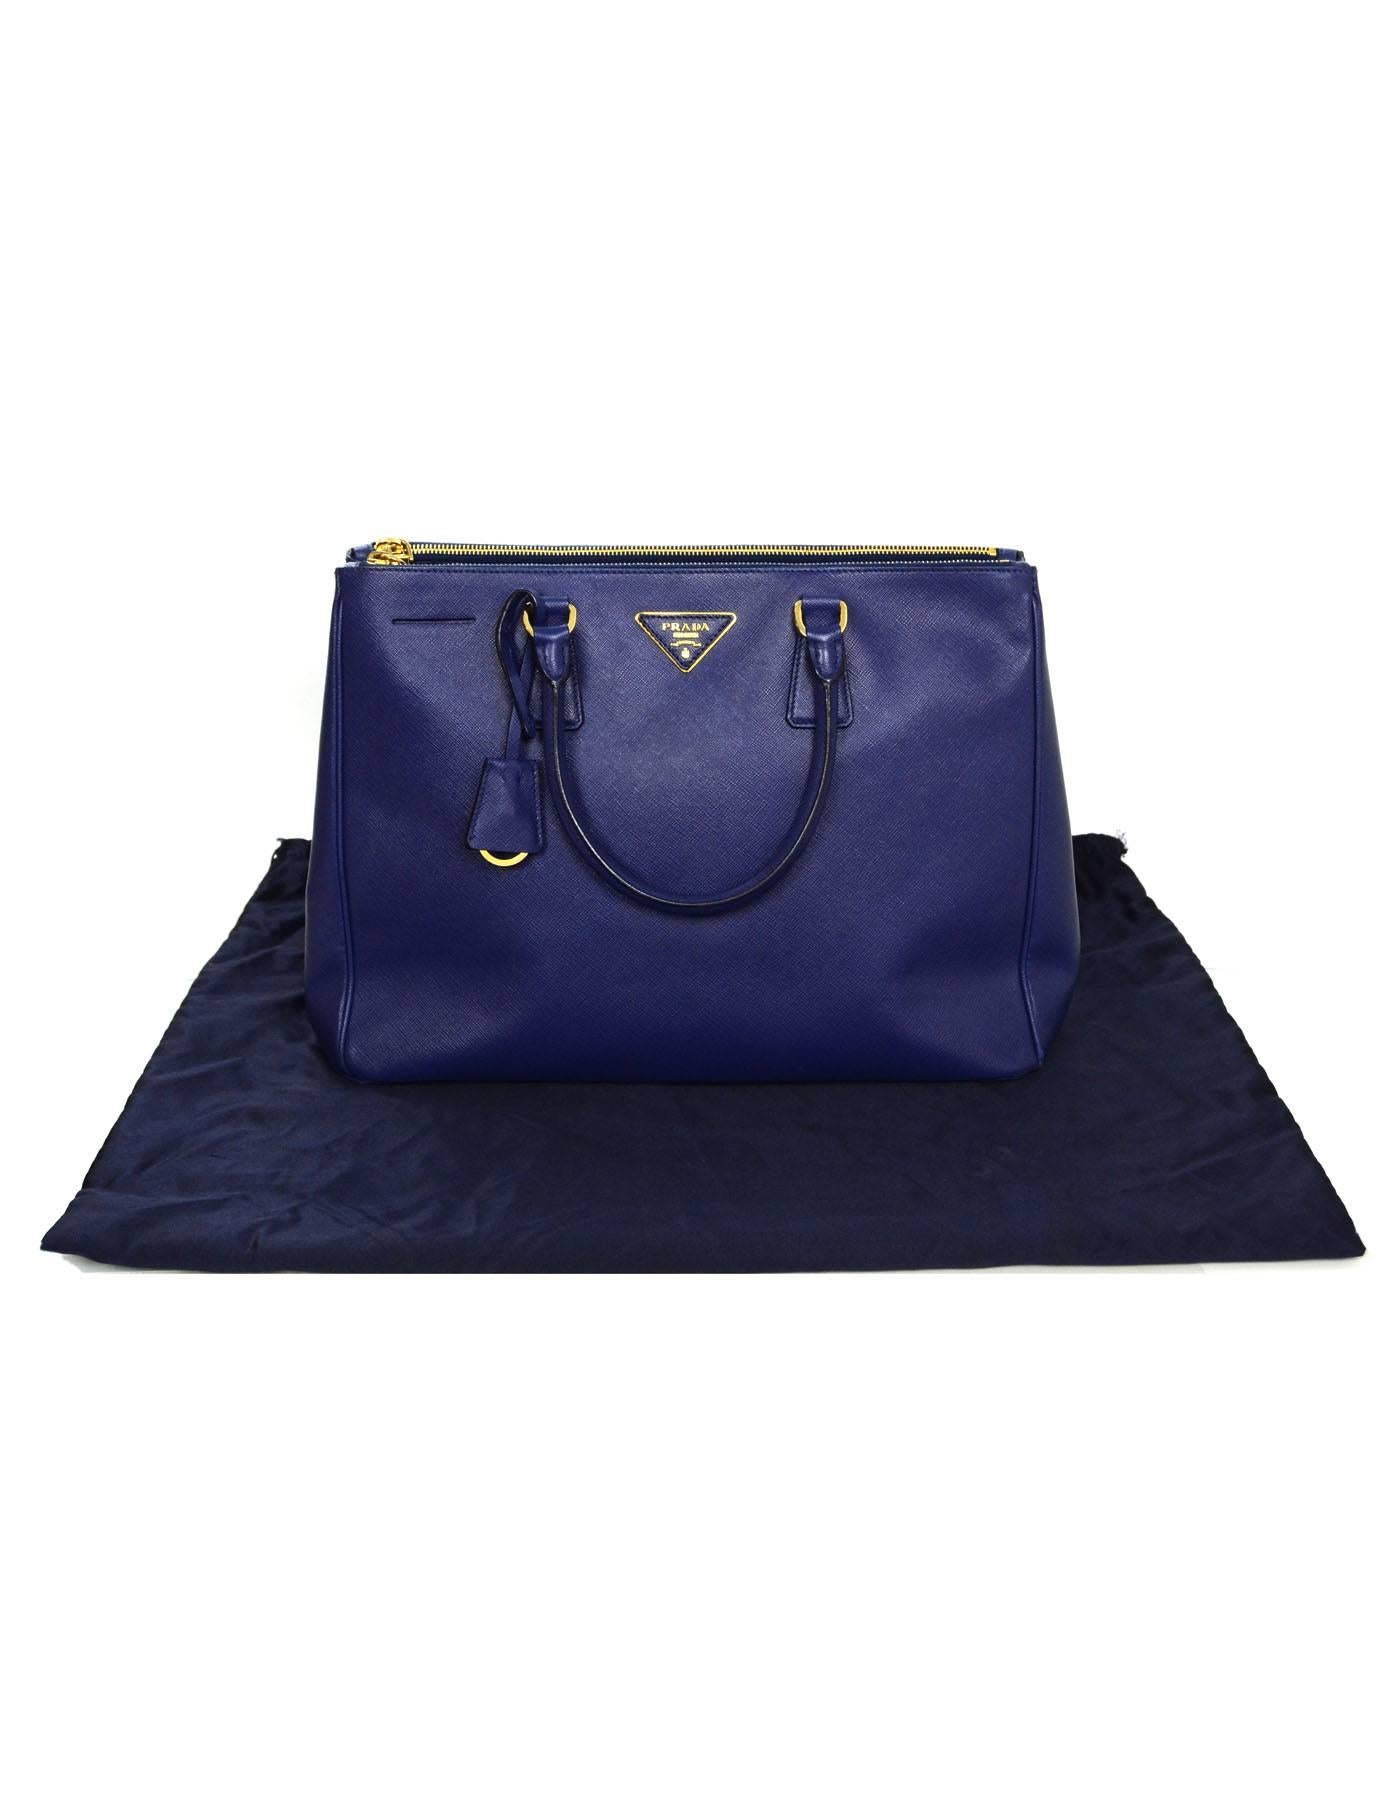 Prada Blue Saffiano Lux Double Zip Tote Bag with GHW 6